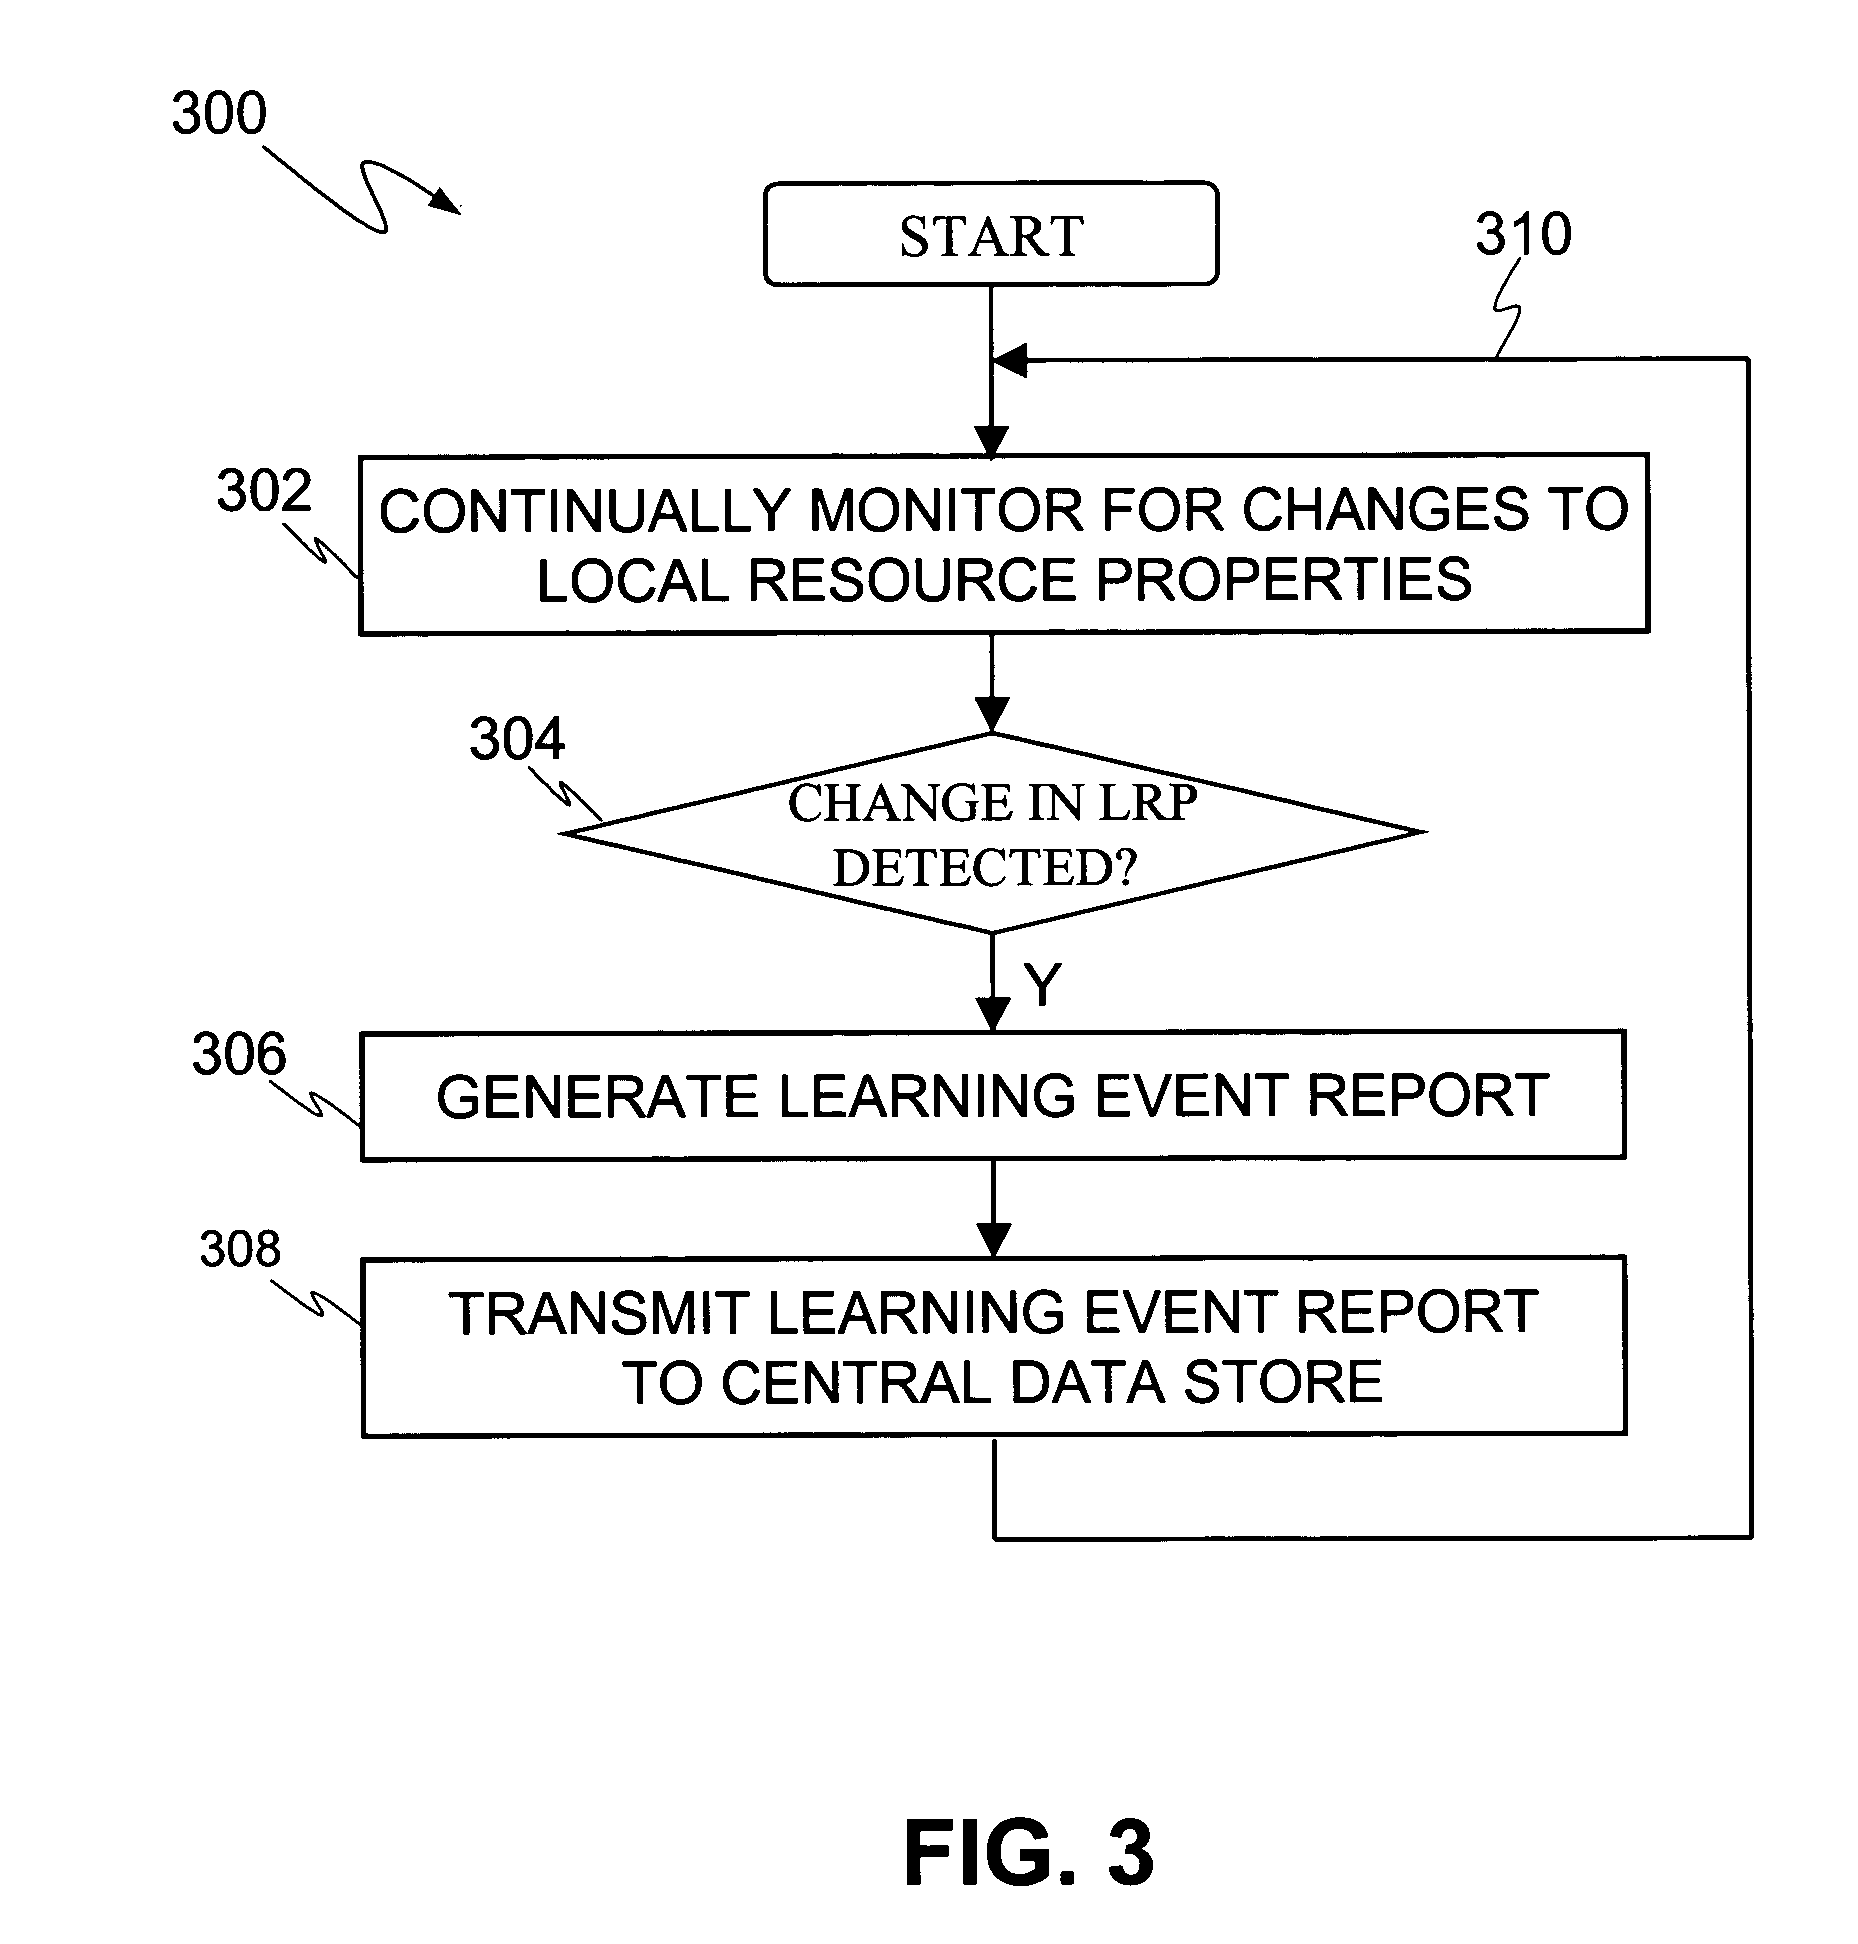 Network resource management in a network device